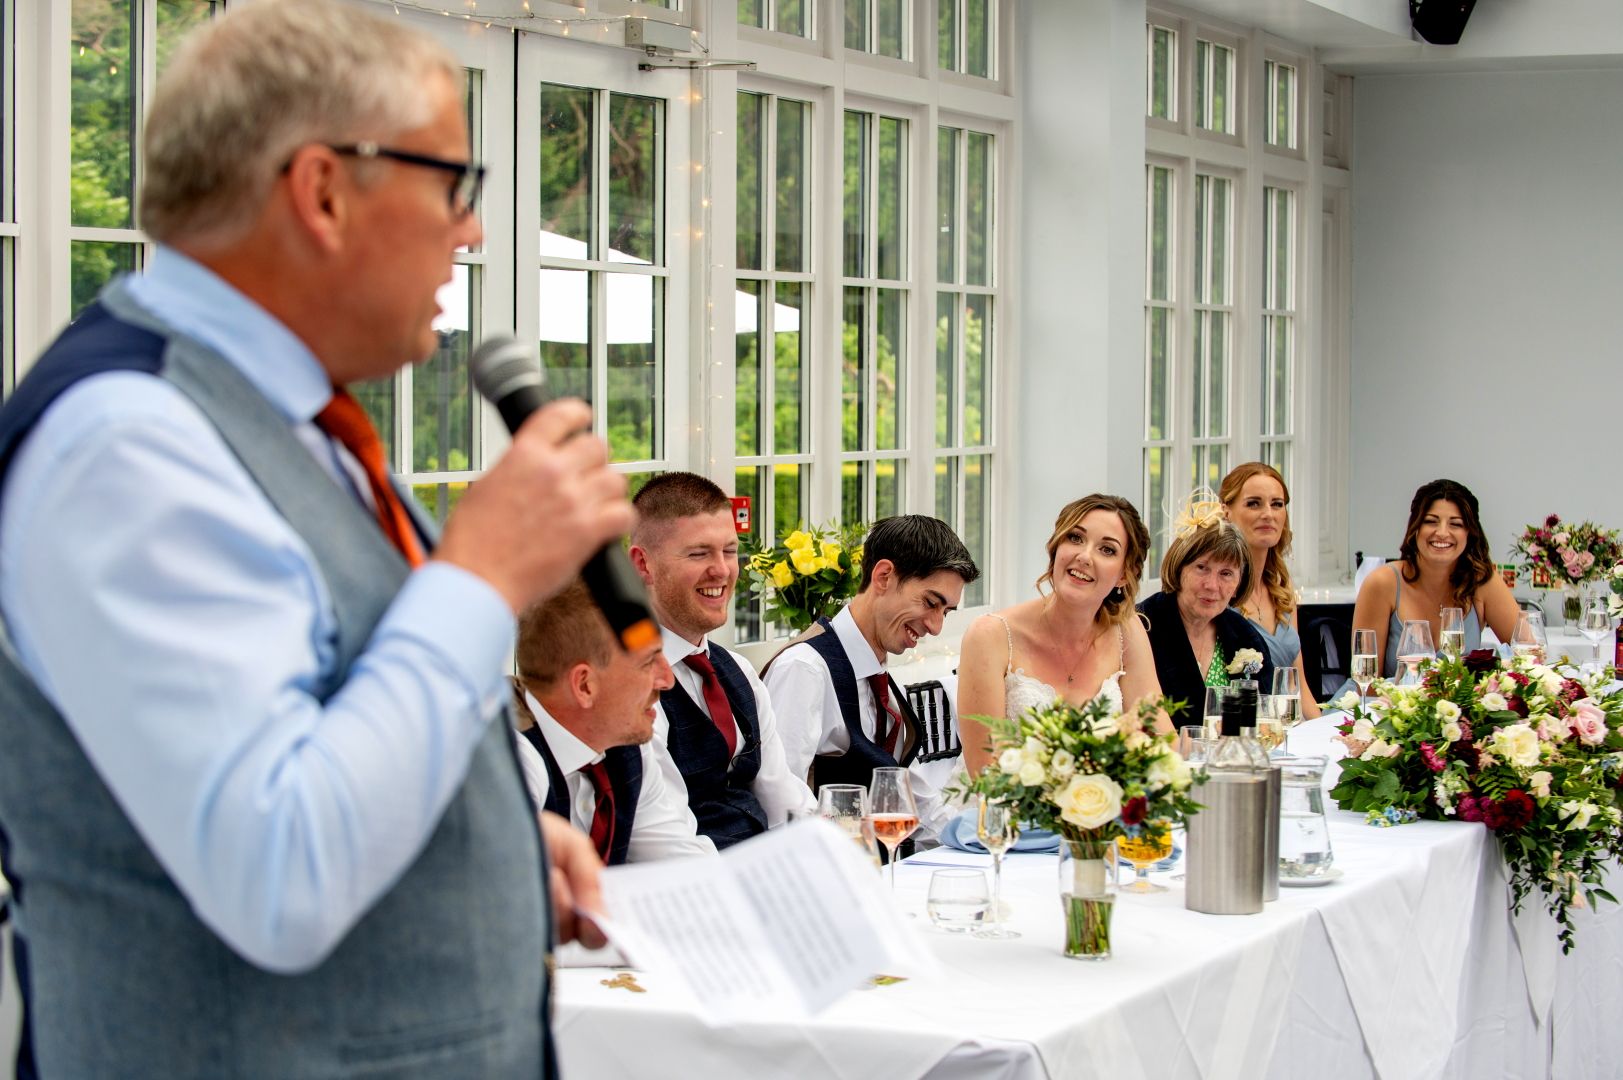 Sophie's Dad giving his speech during Ross and Sophie's wedding reception. Photo thanks to Fountain Photography.